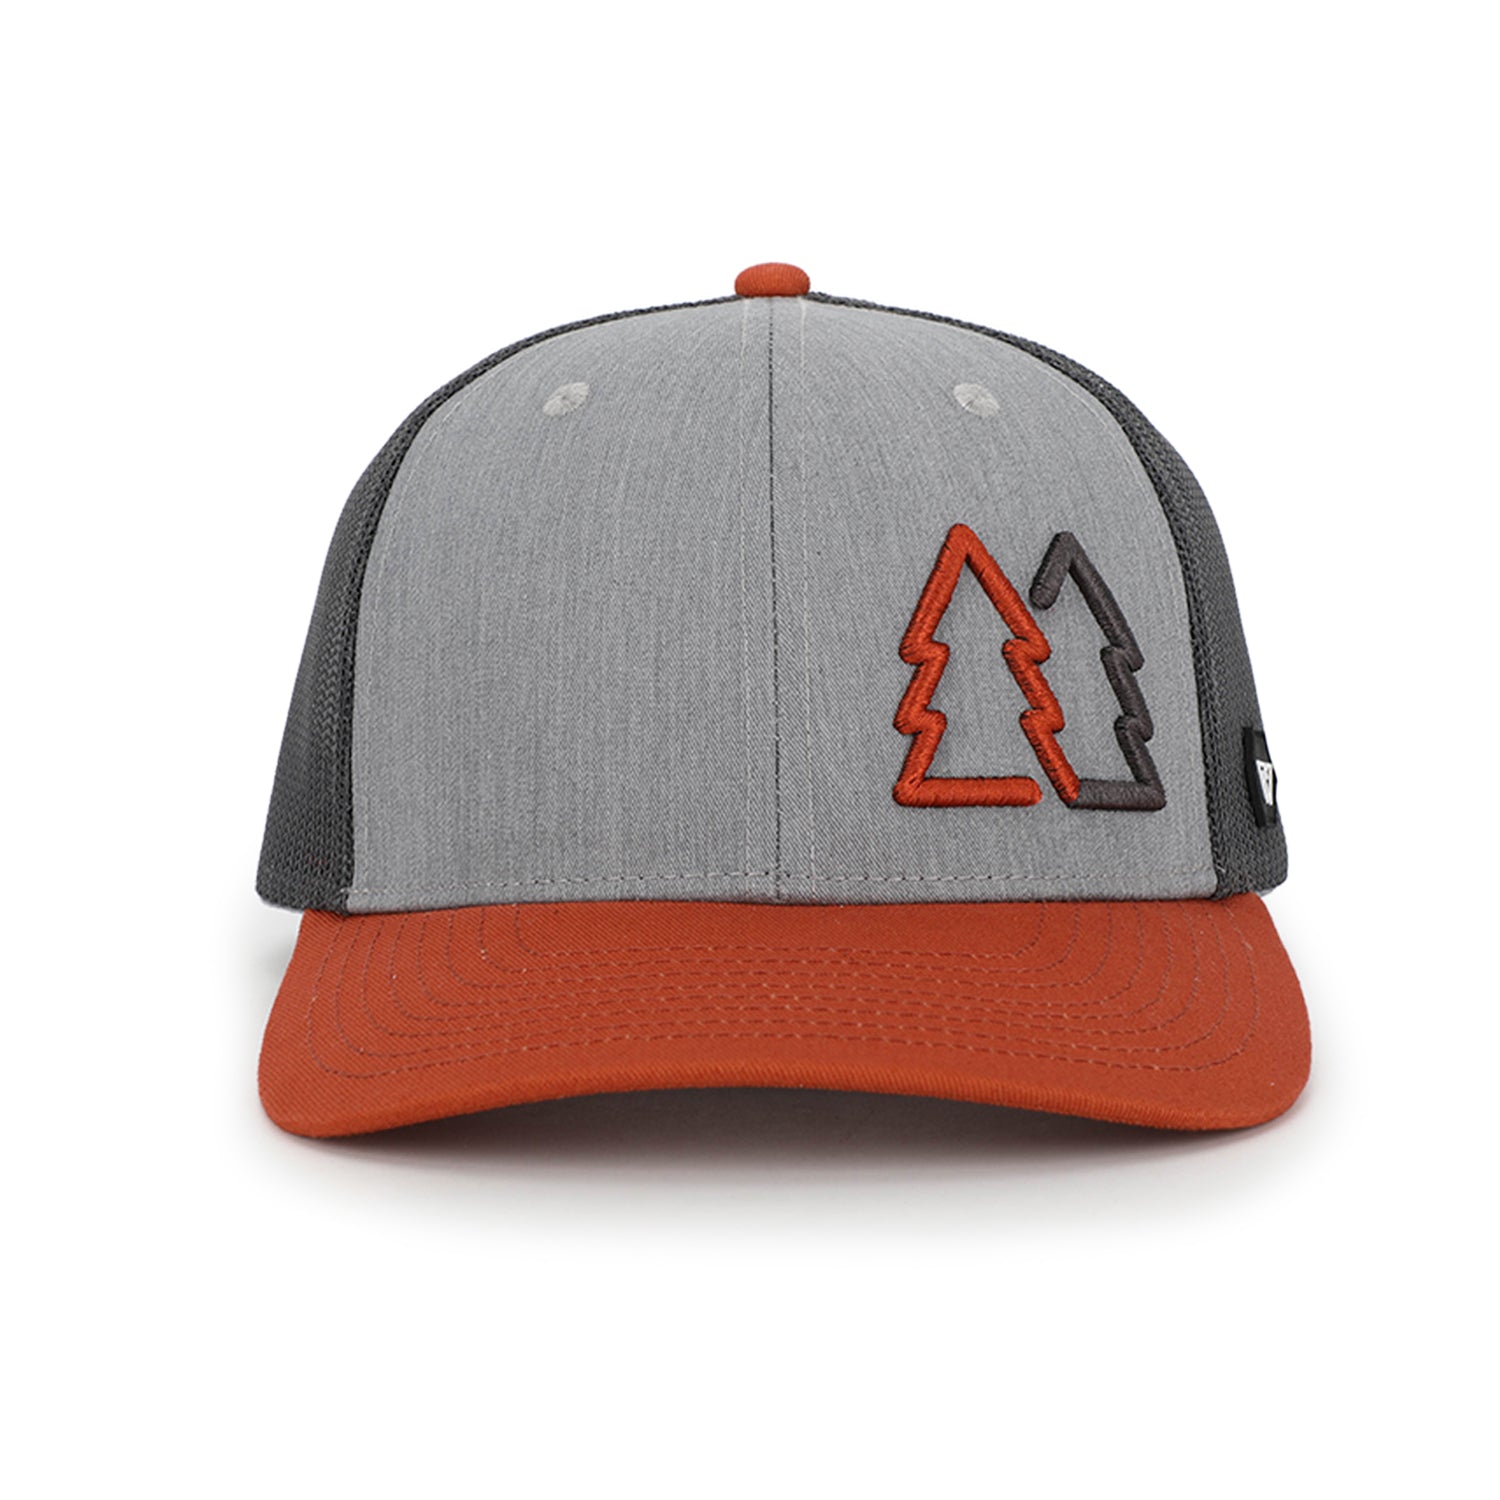 WUE Trucker Hat - Explore The Outdoors - Snapback Hats for Men